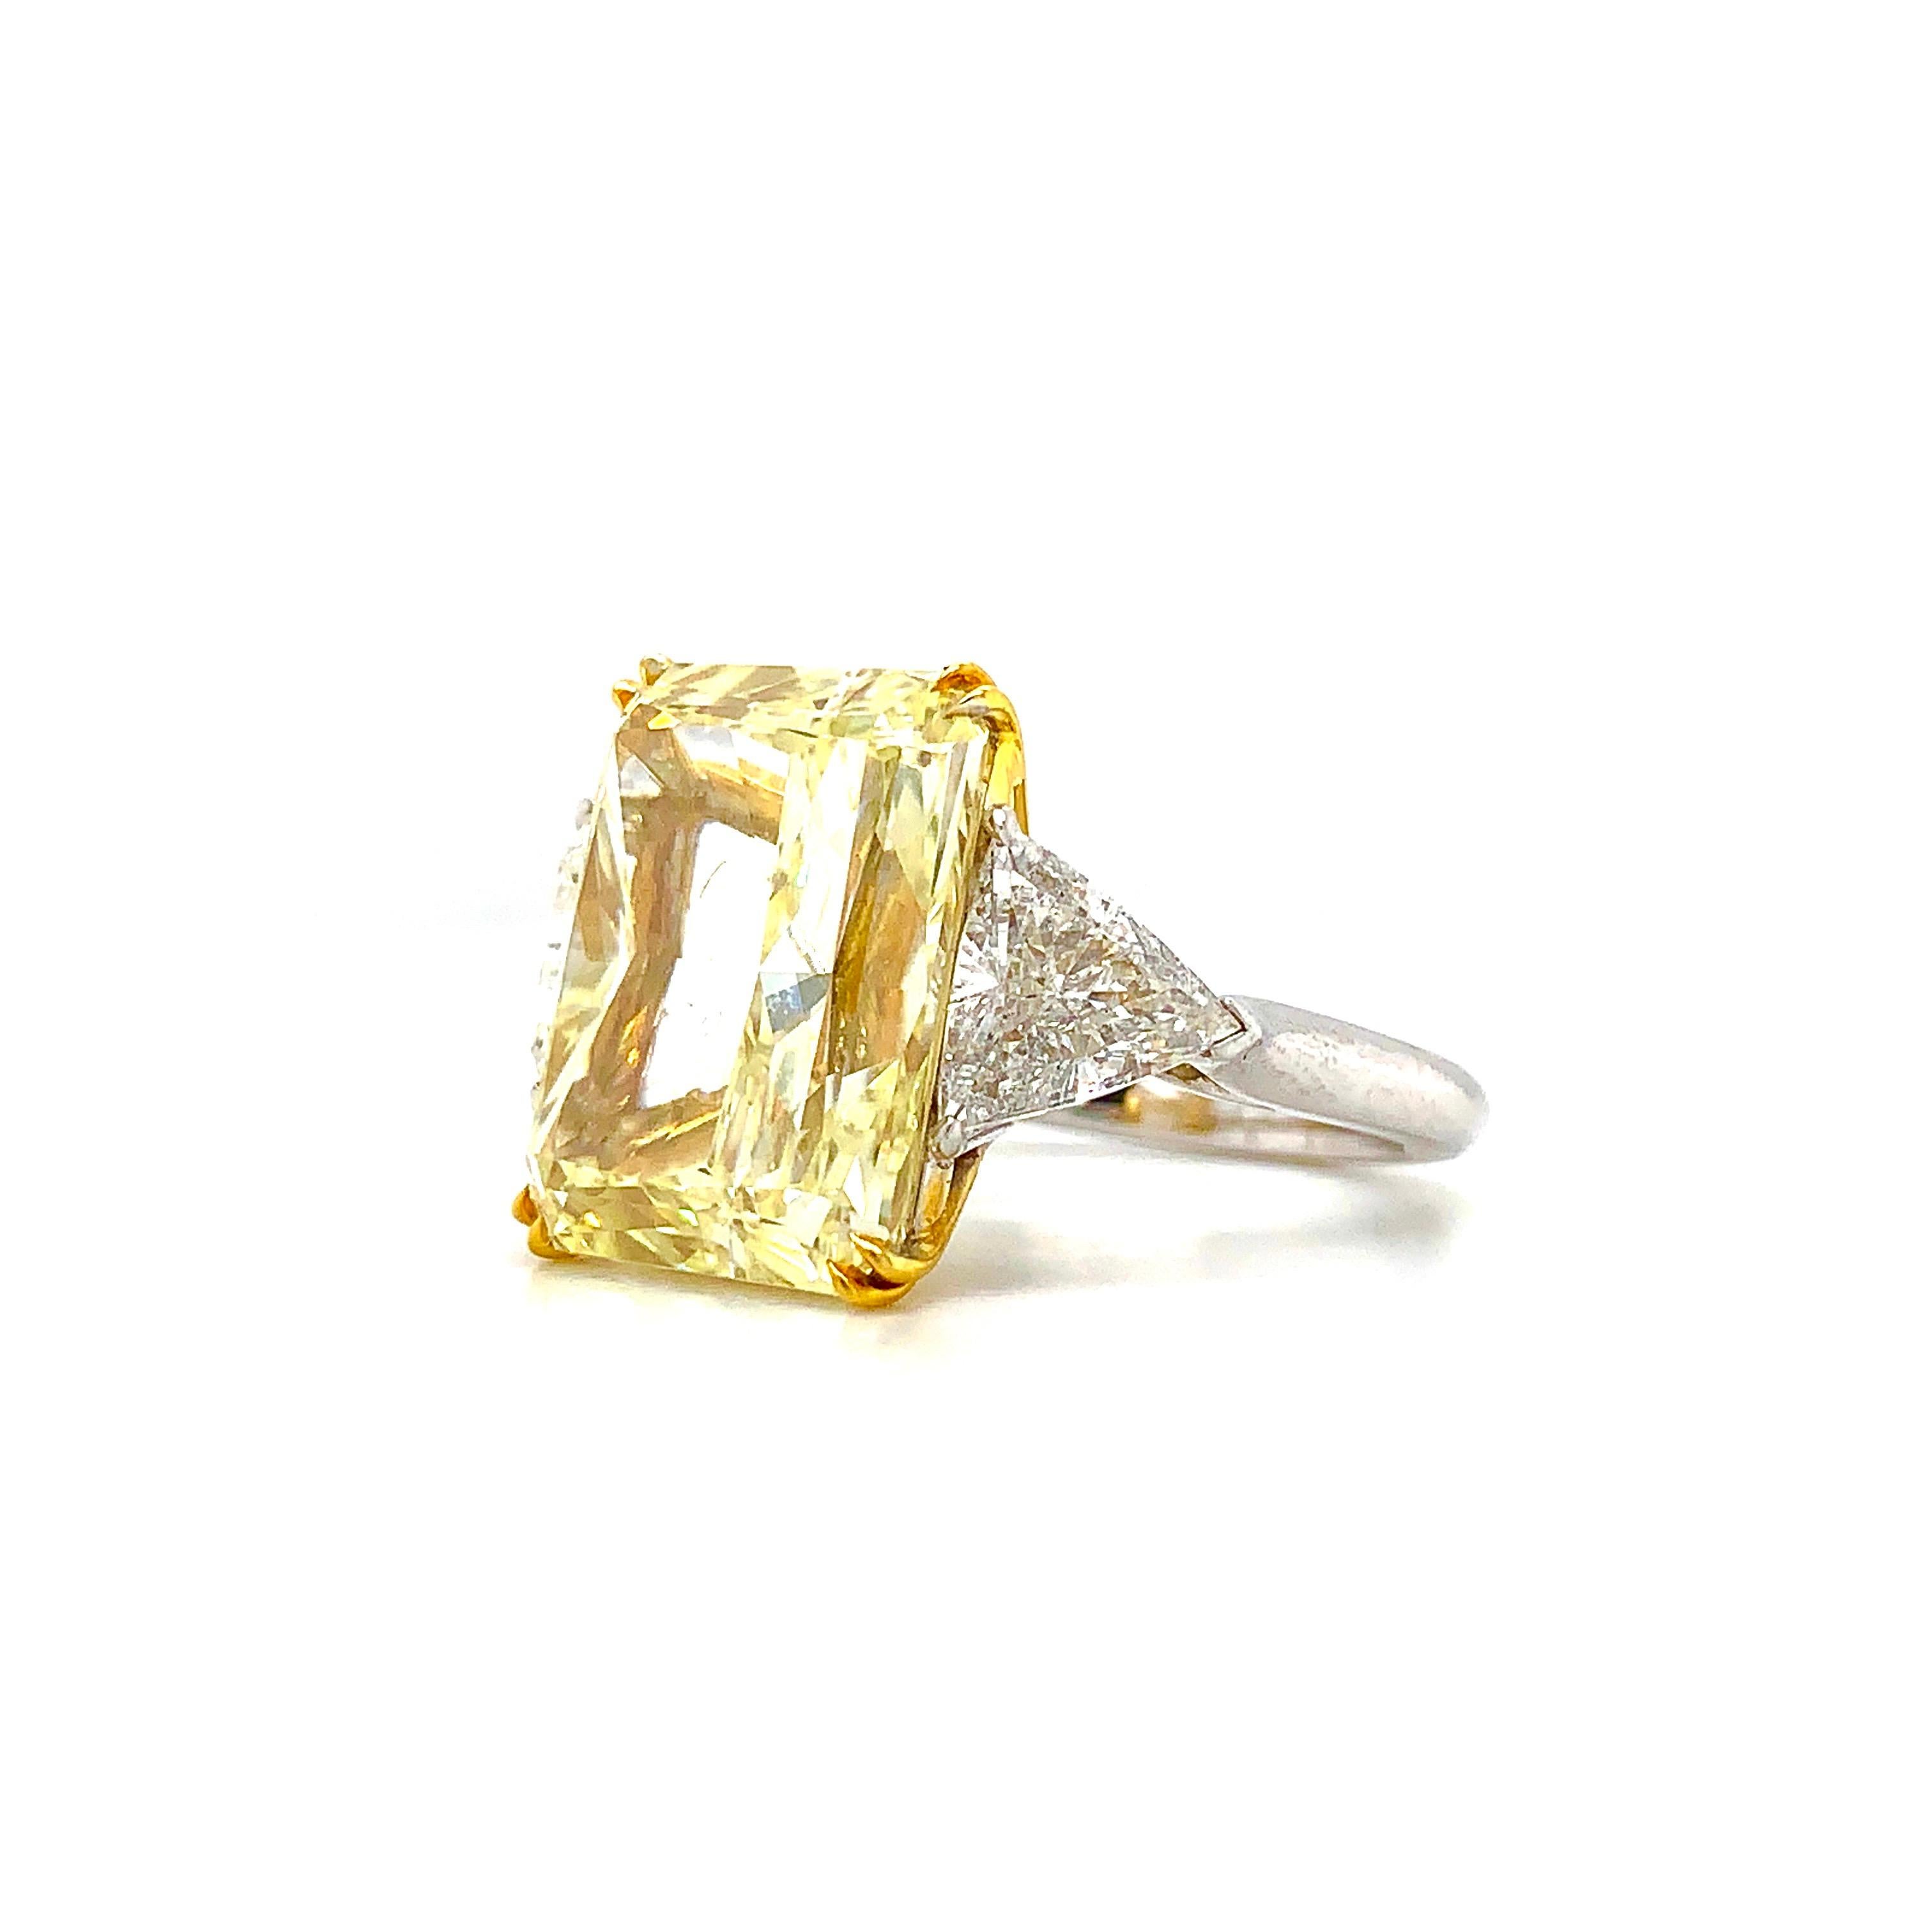 This magnificent engagement ring features a 14.20 carat yellow rectangular radiant cut diamond . this diamond exhibits strong canary yellow color with full saturation. this diamond is graded by the GIA as being natural in color. this stone is set in